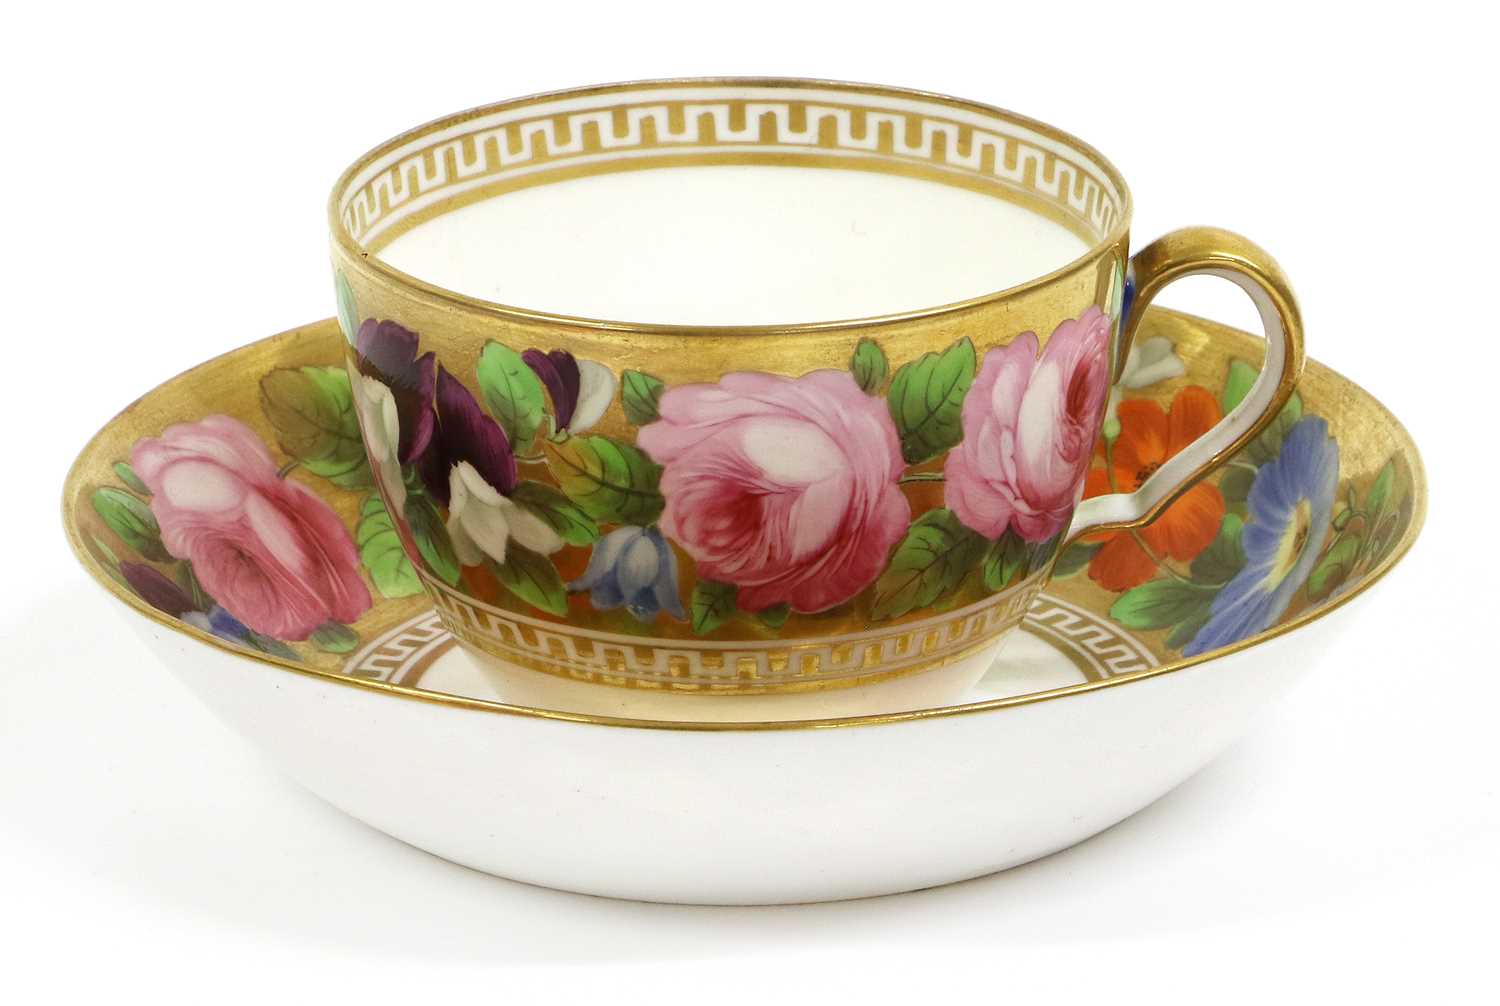 A Spode Teacup and Saucer, circa 1810, of bute shape, gilt ground and painted with large flowers - Image 5 of 5